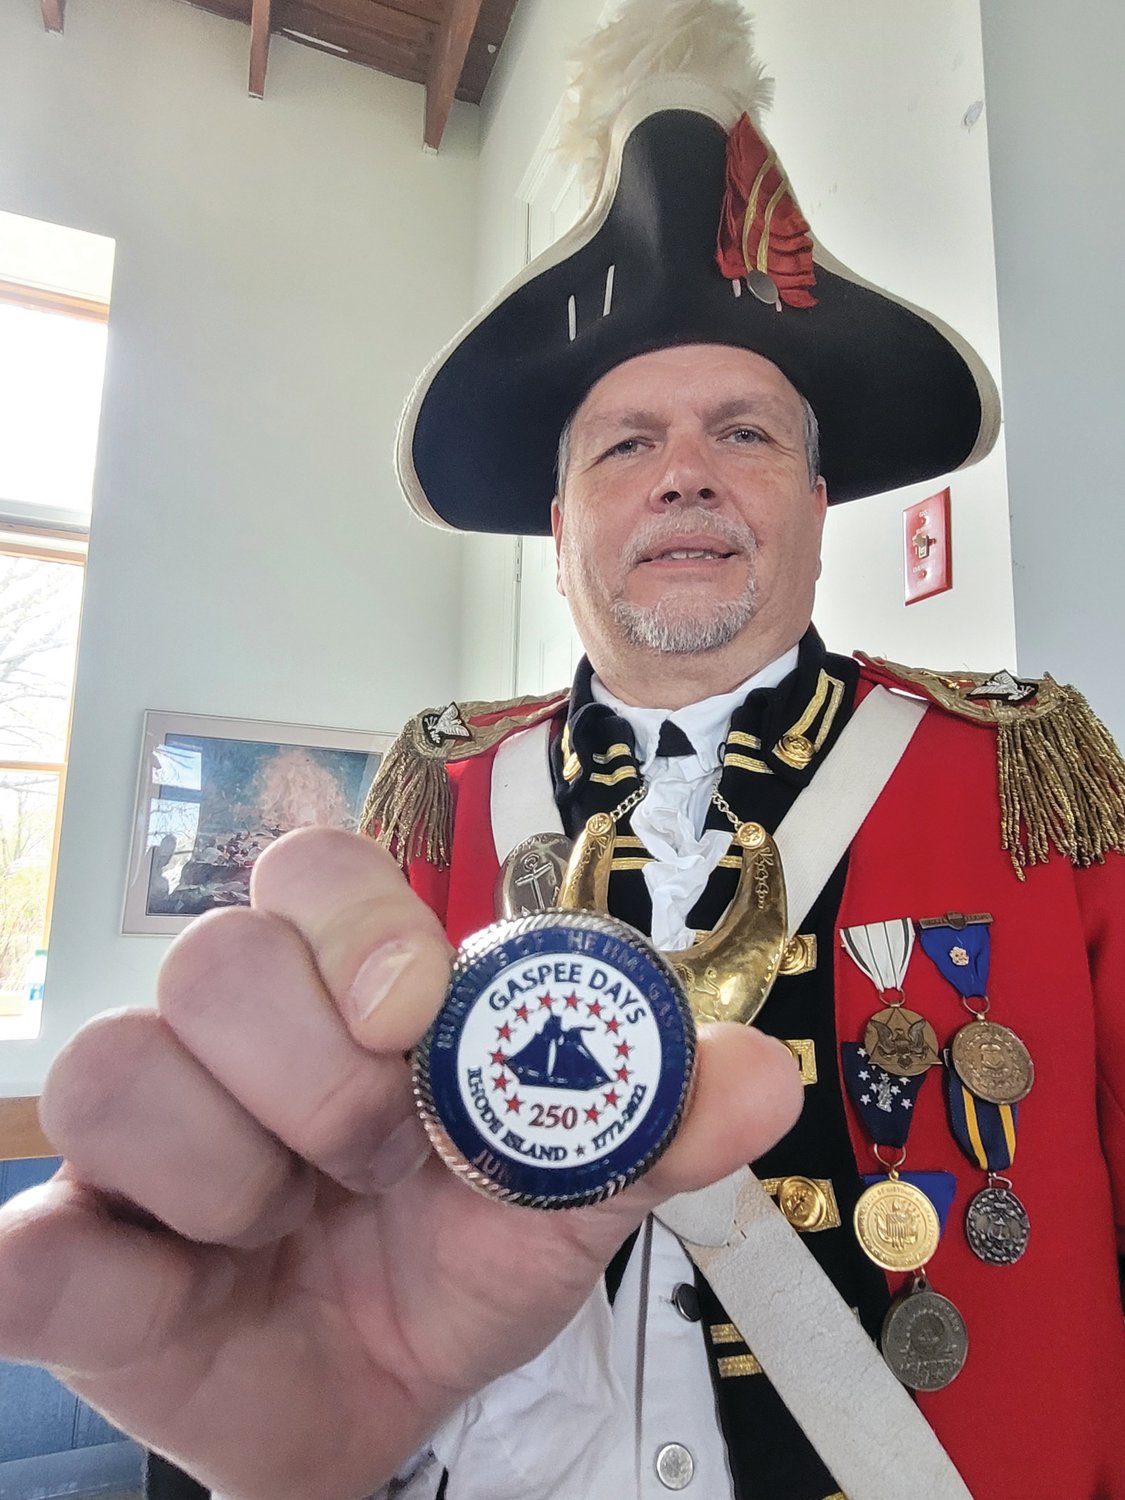 CHALLENGE COIN: Col. Ron Barnes, Commander of the Pawtuxet Rangers, holds a challenge coin. Barnes presented a similar coin to Britain’s Consul General for New England Dr. Peter Abbott OBE, during an announcement event for an underwater search for the Gaspee’s remains. If Barnes challenges Abbott to show the coin while out for drinks, and Abbott can’t produce it, the tab’s on the Brits. If he challenges and Abbott produces the coin, drinks are on the Pawtuxet Rangers.